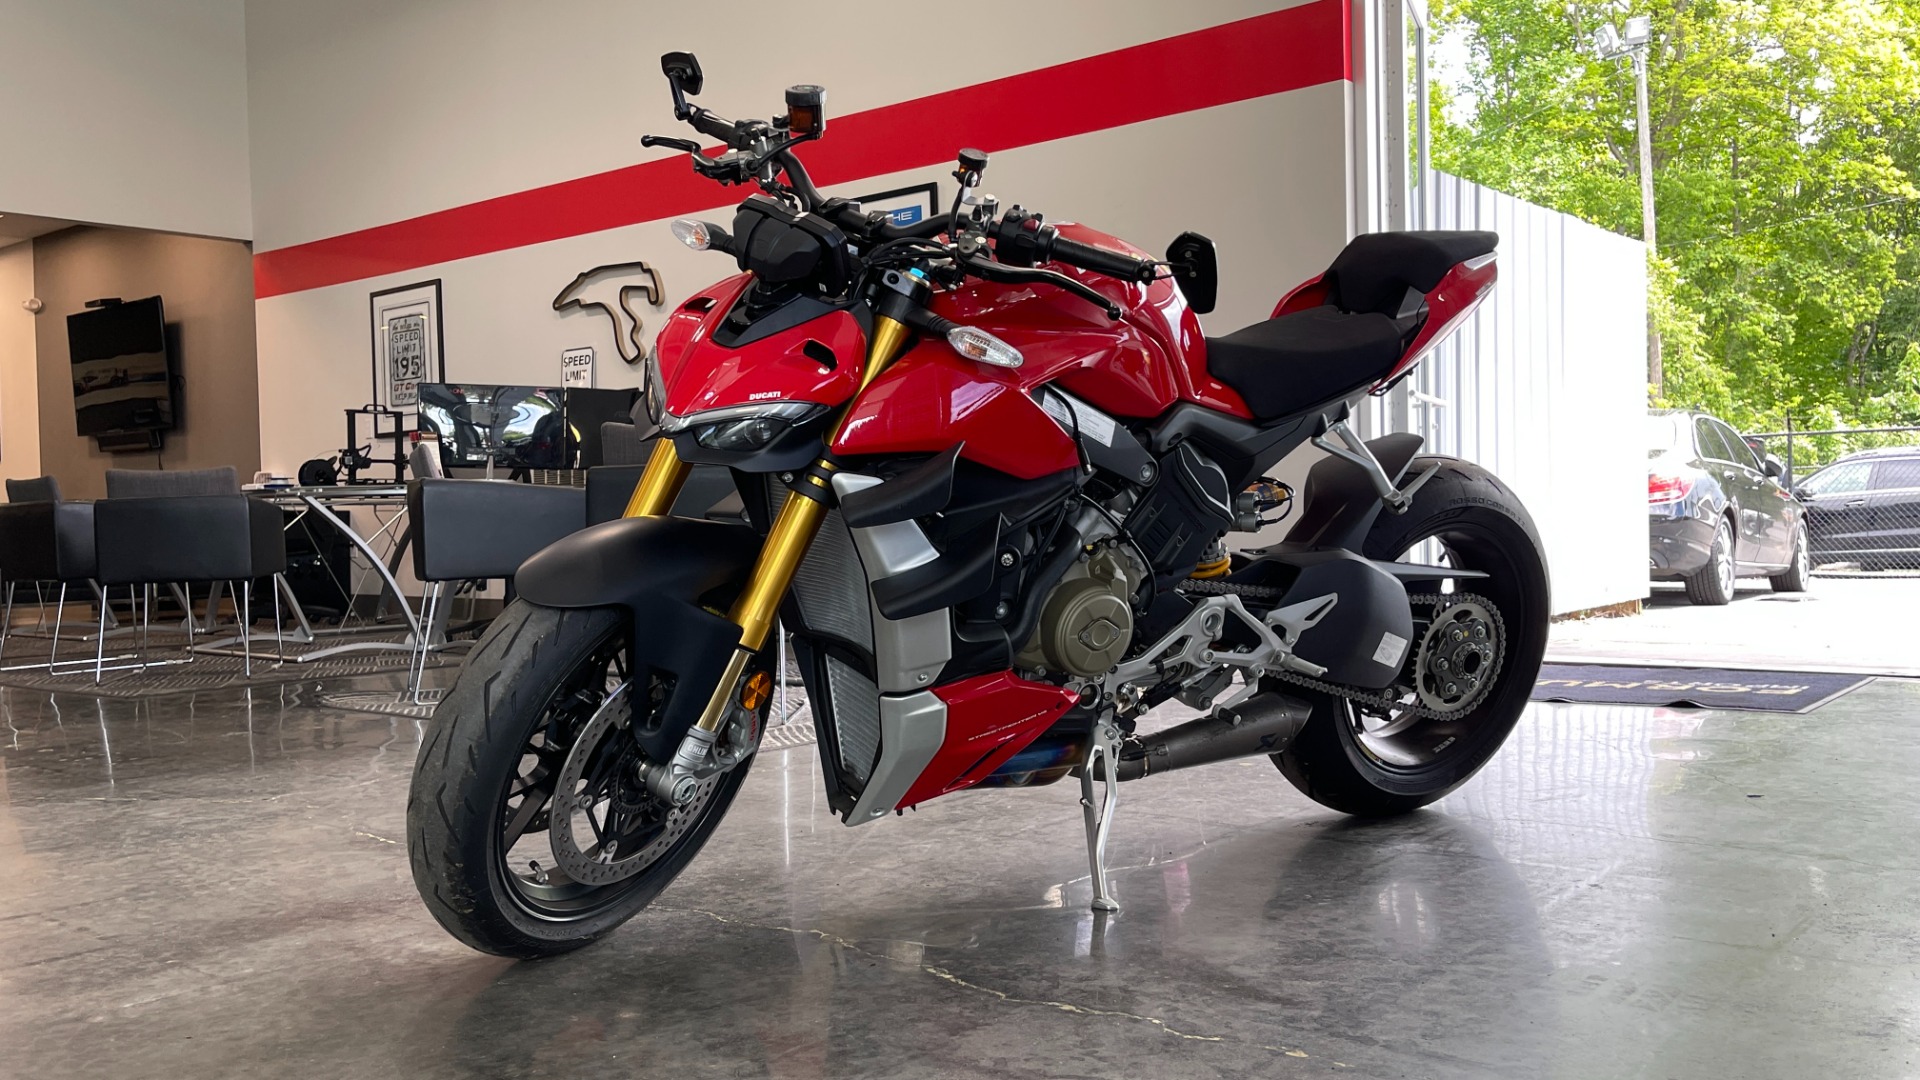 Used 2020 Ducati STREETFIGHTER V4S 1100CC MOTORCYCLE / 208HP (153 kW) / LIKE NEW for sale $24,599 at Formula Imports in Charlotte NC 28227 1